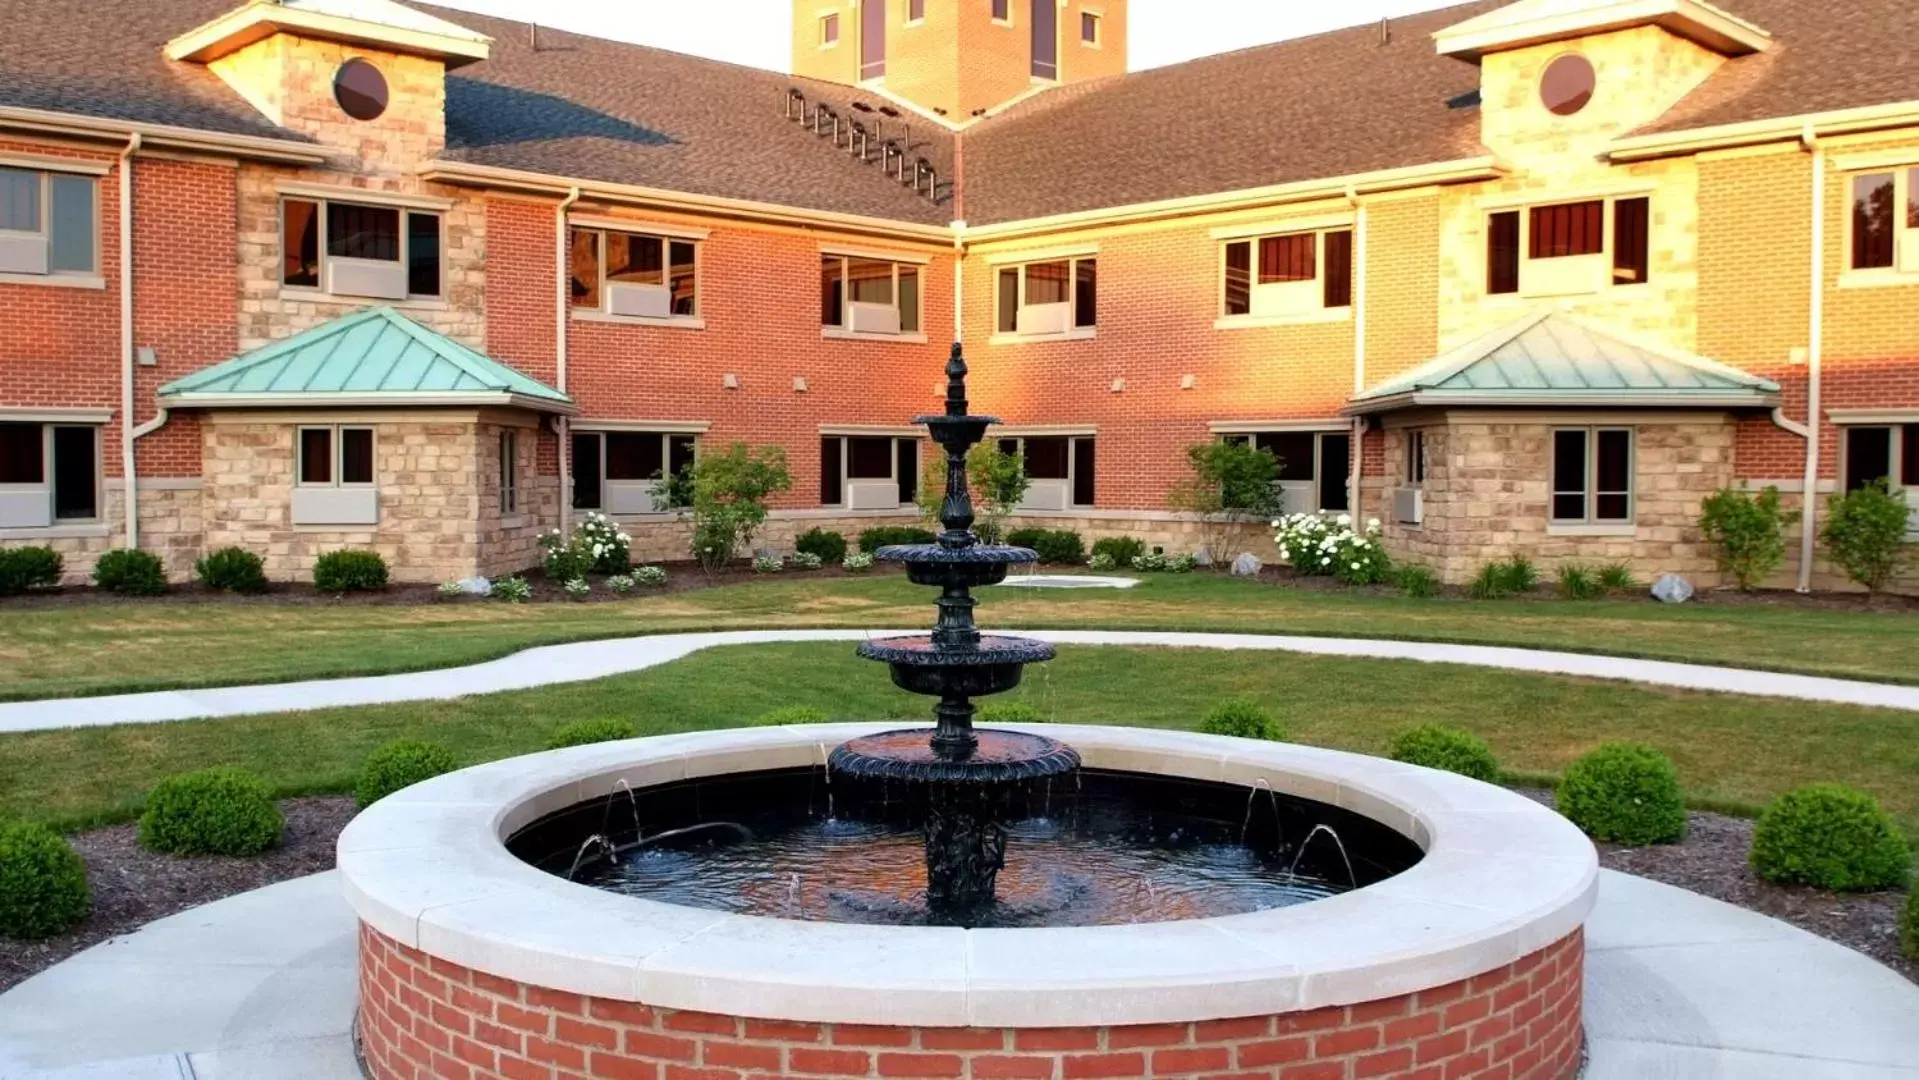 Property building in The Inn at Ohio Northern University